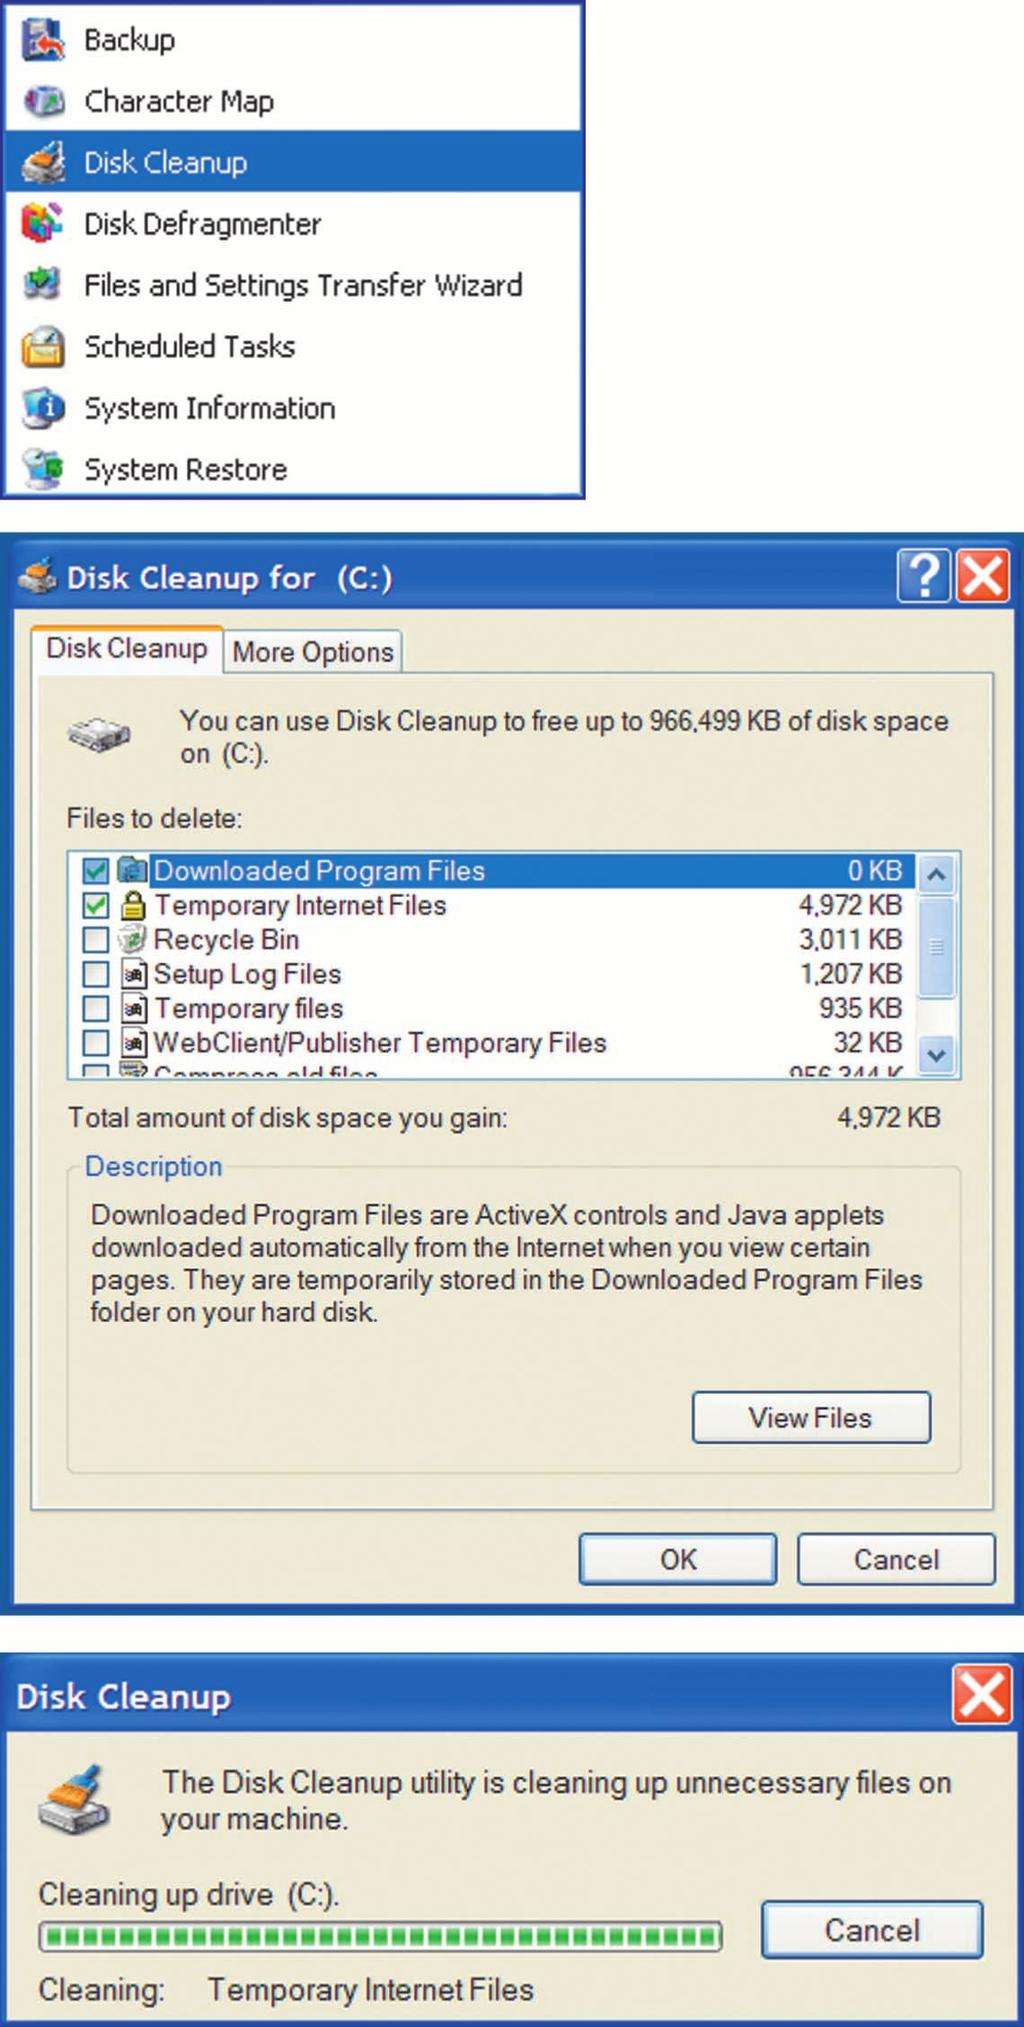 Disk Cleanup Identifies and